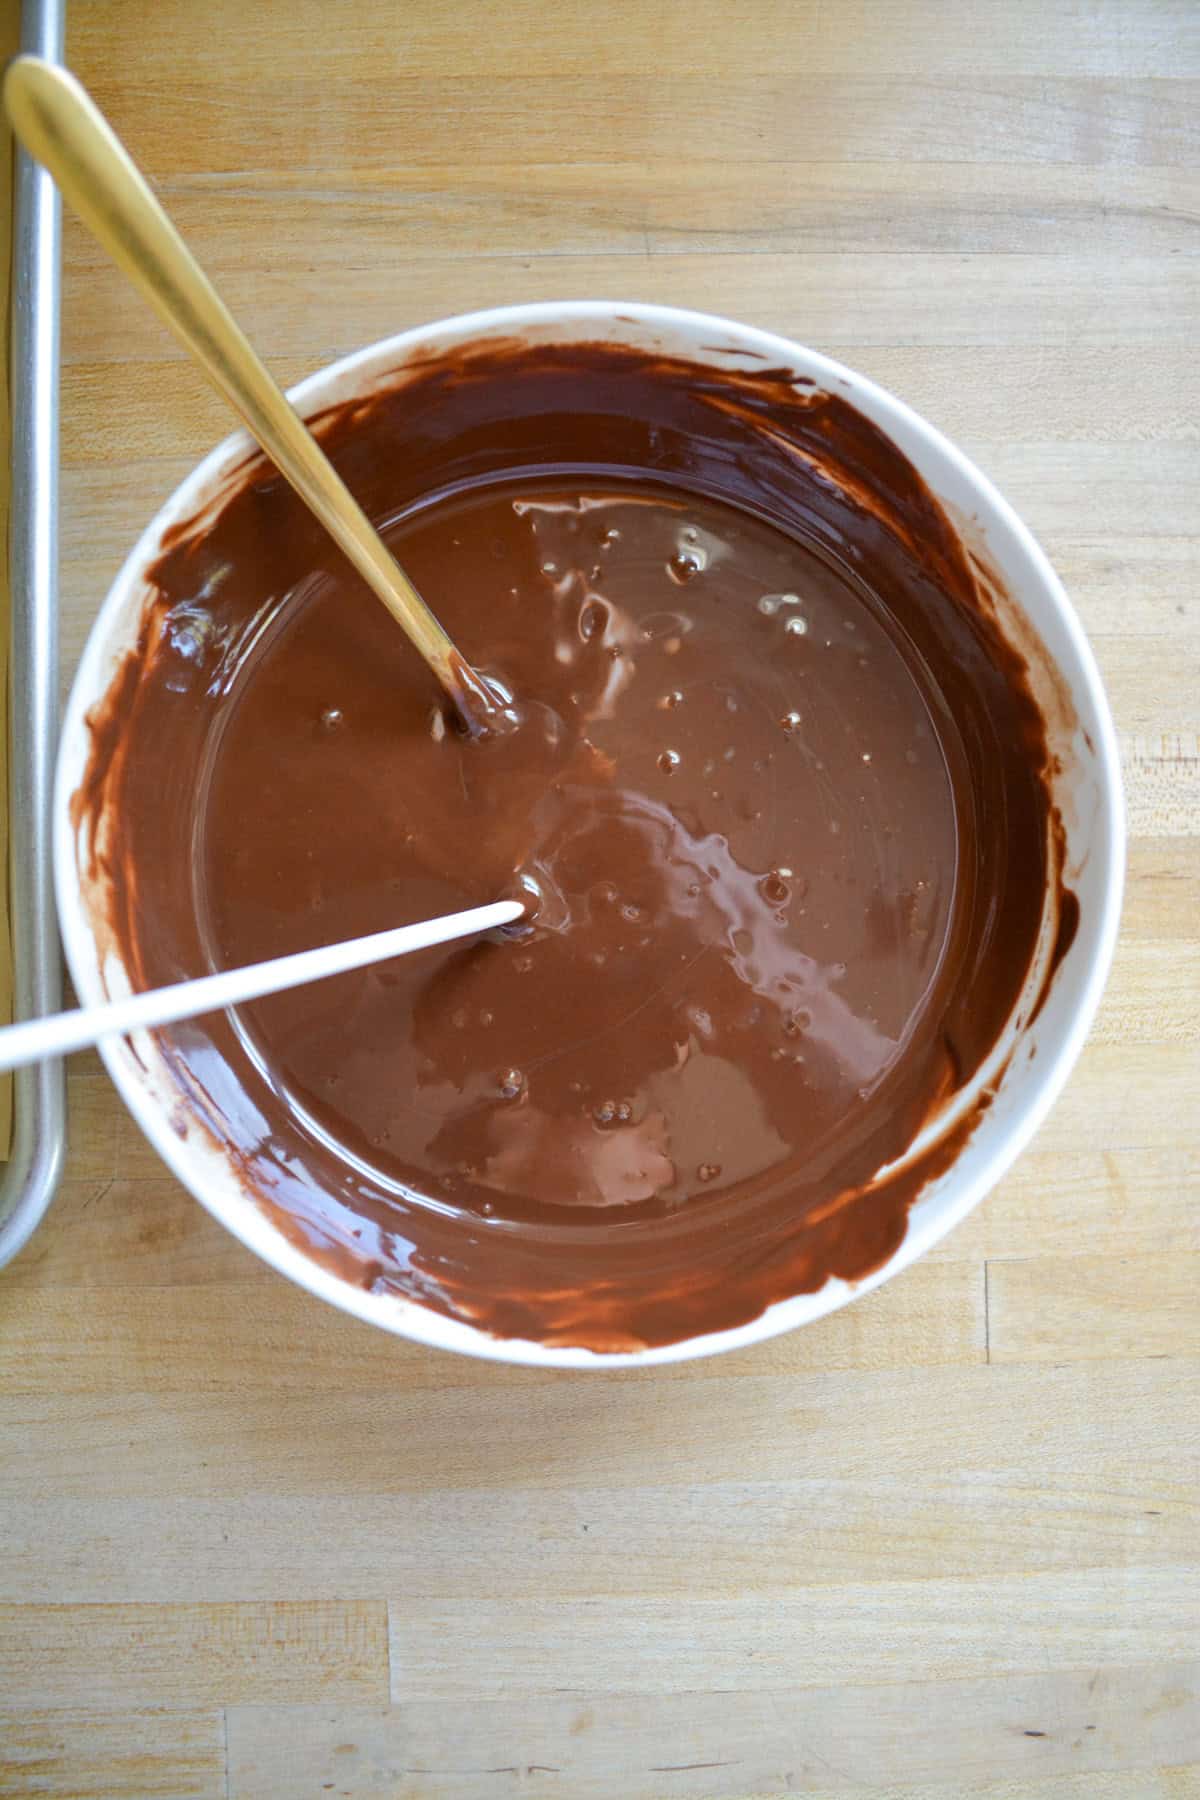 Melted chocolate in a bowl with a paper lollipop stick dipped into the chocolate.